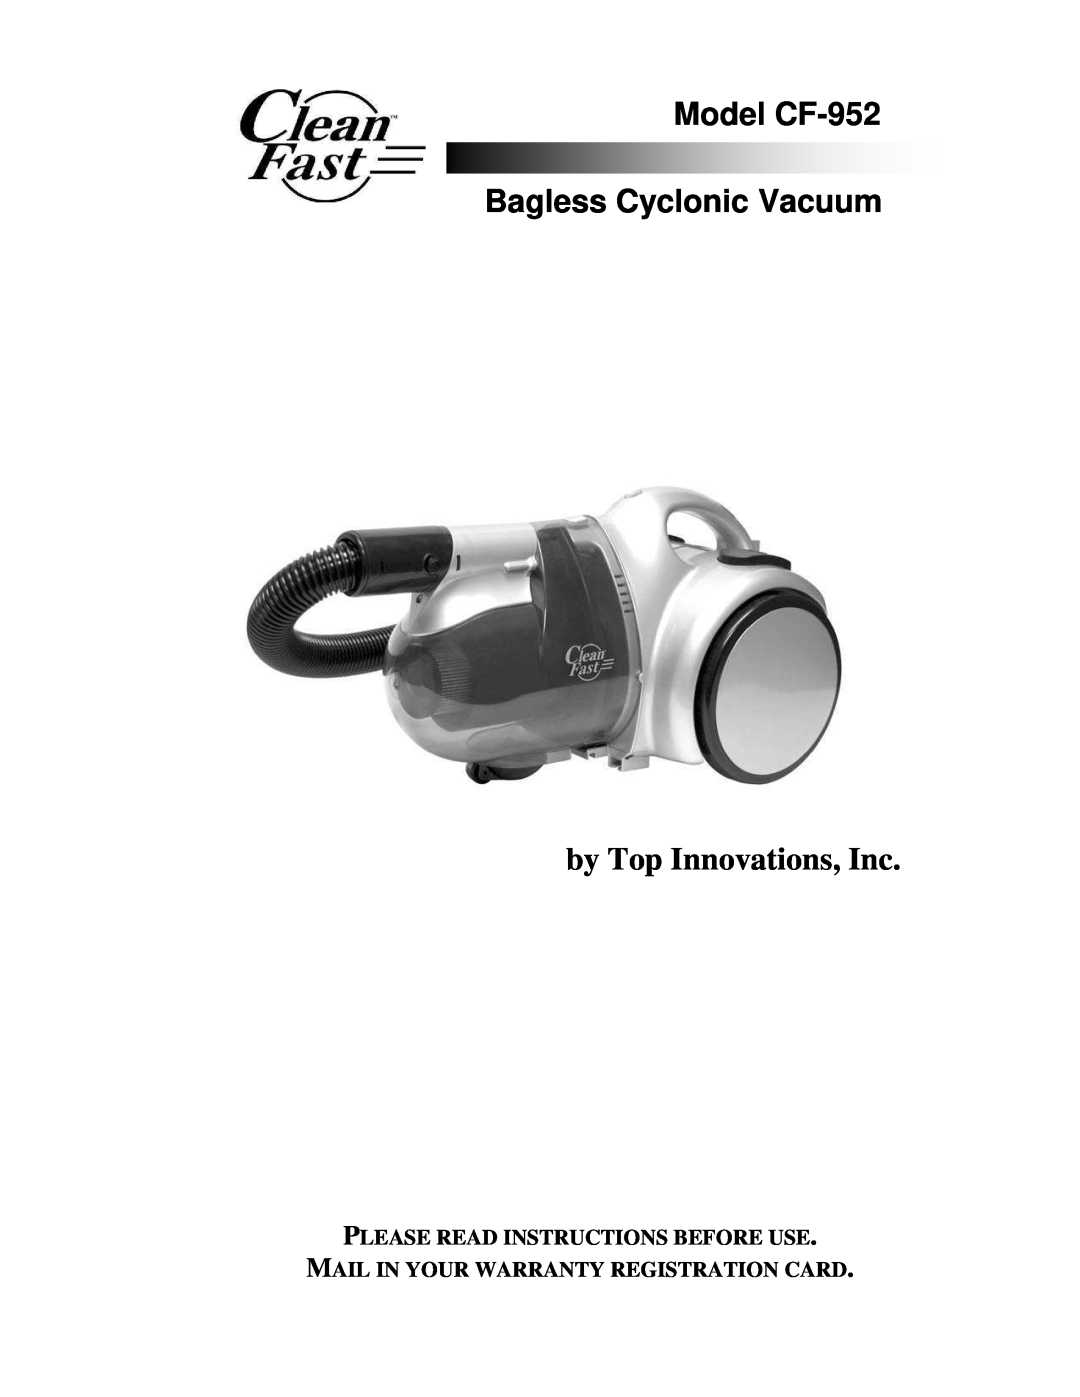 Top Innovations warranty by Top Innovations, Inc, Model CF-952 Bagless Cyclonic Vacuum 